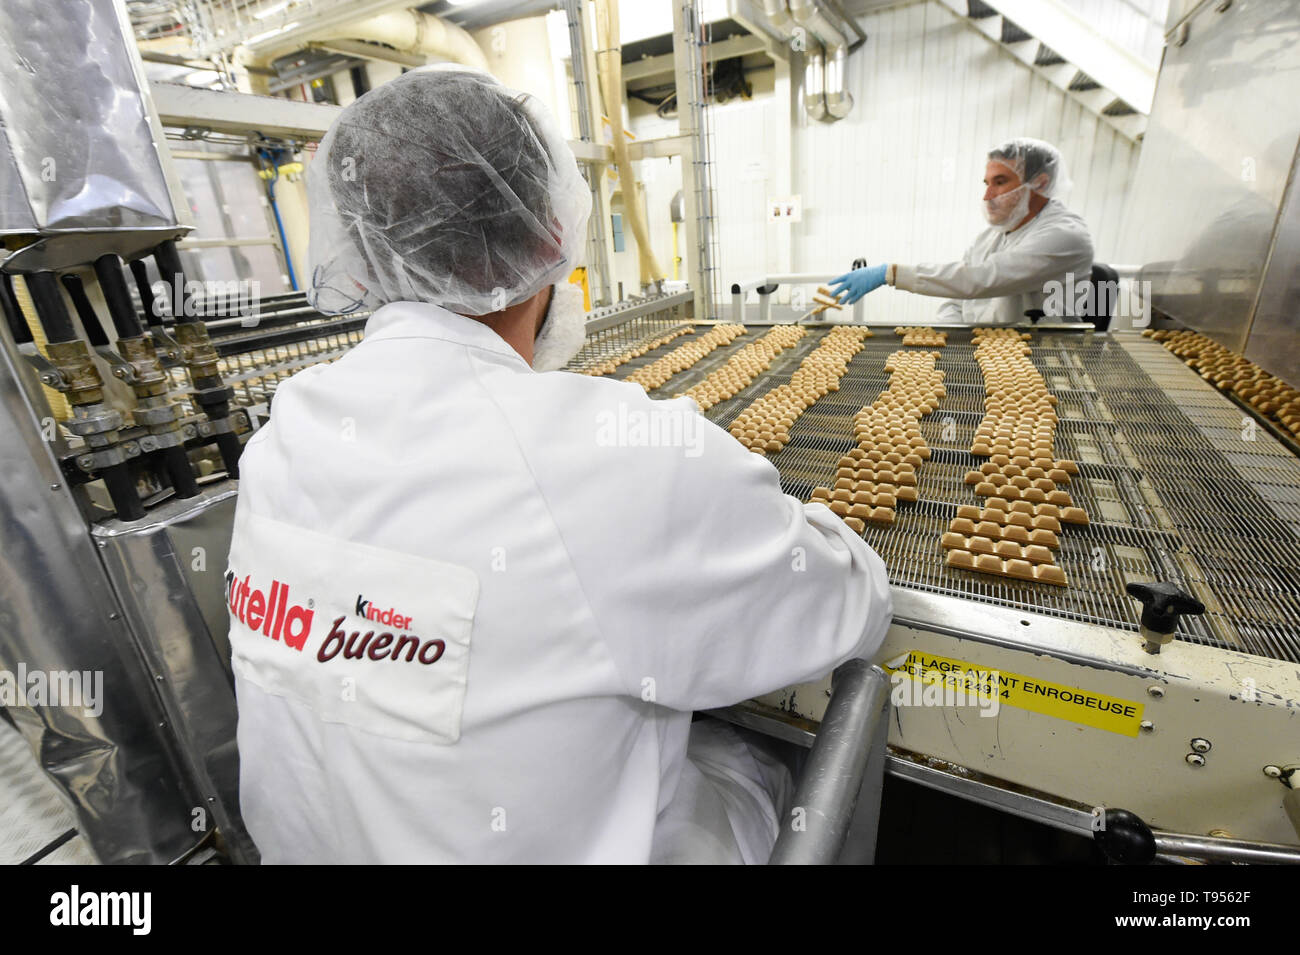 Ferrero plant in Villers-Ecalles, the company's first ever Nutella factory. Kinder Bueno production line *** Local Caption *** Stock Photo